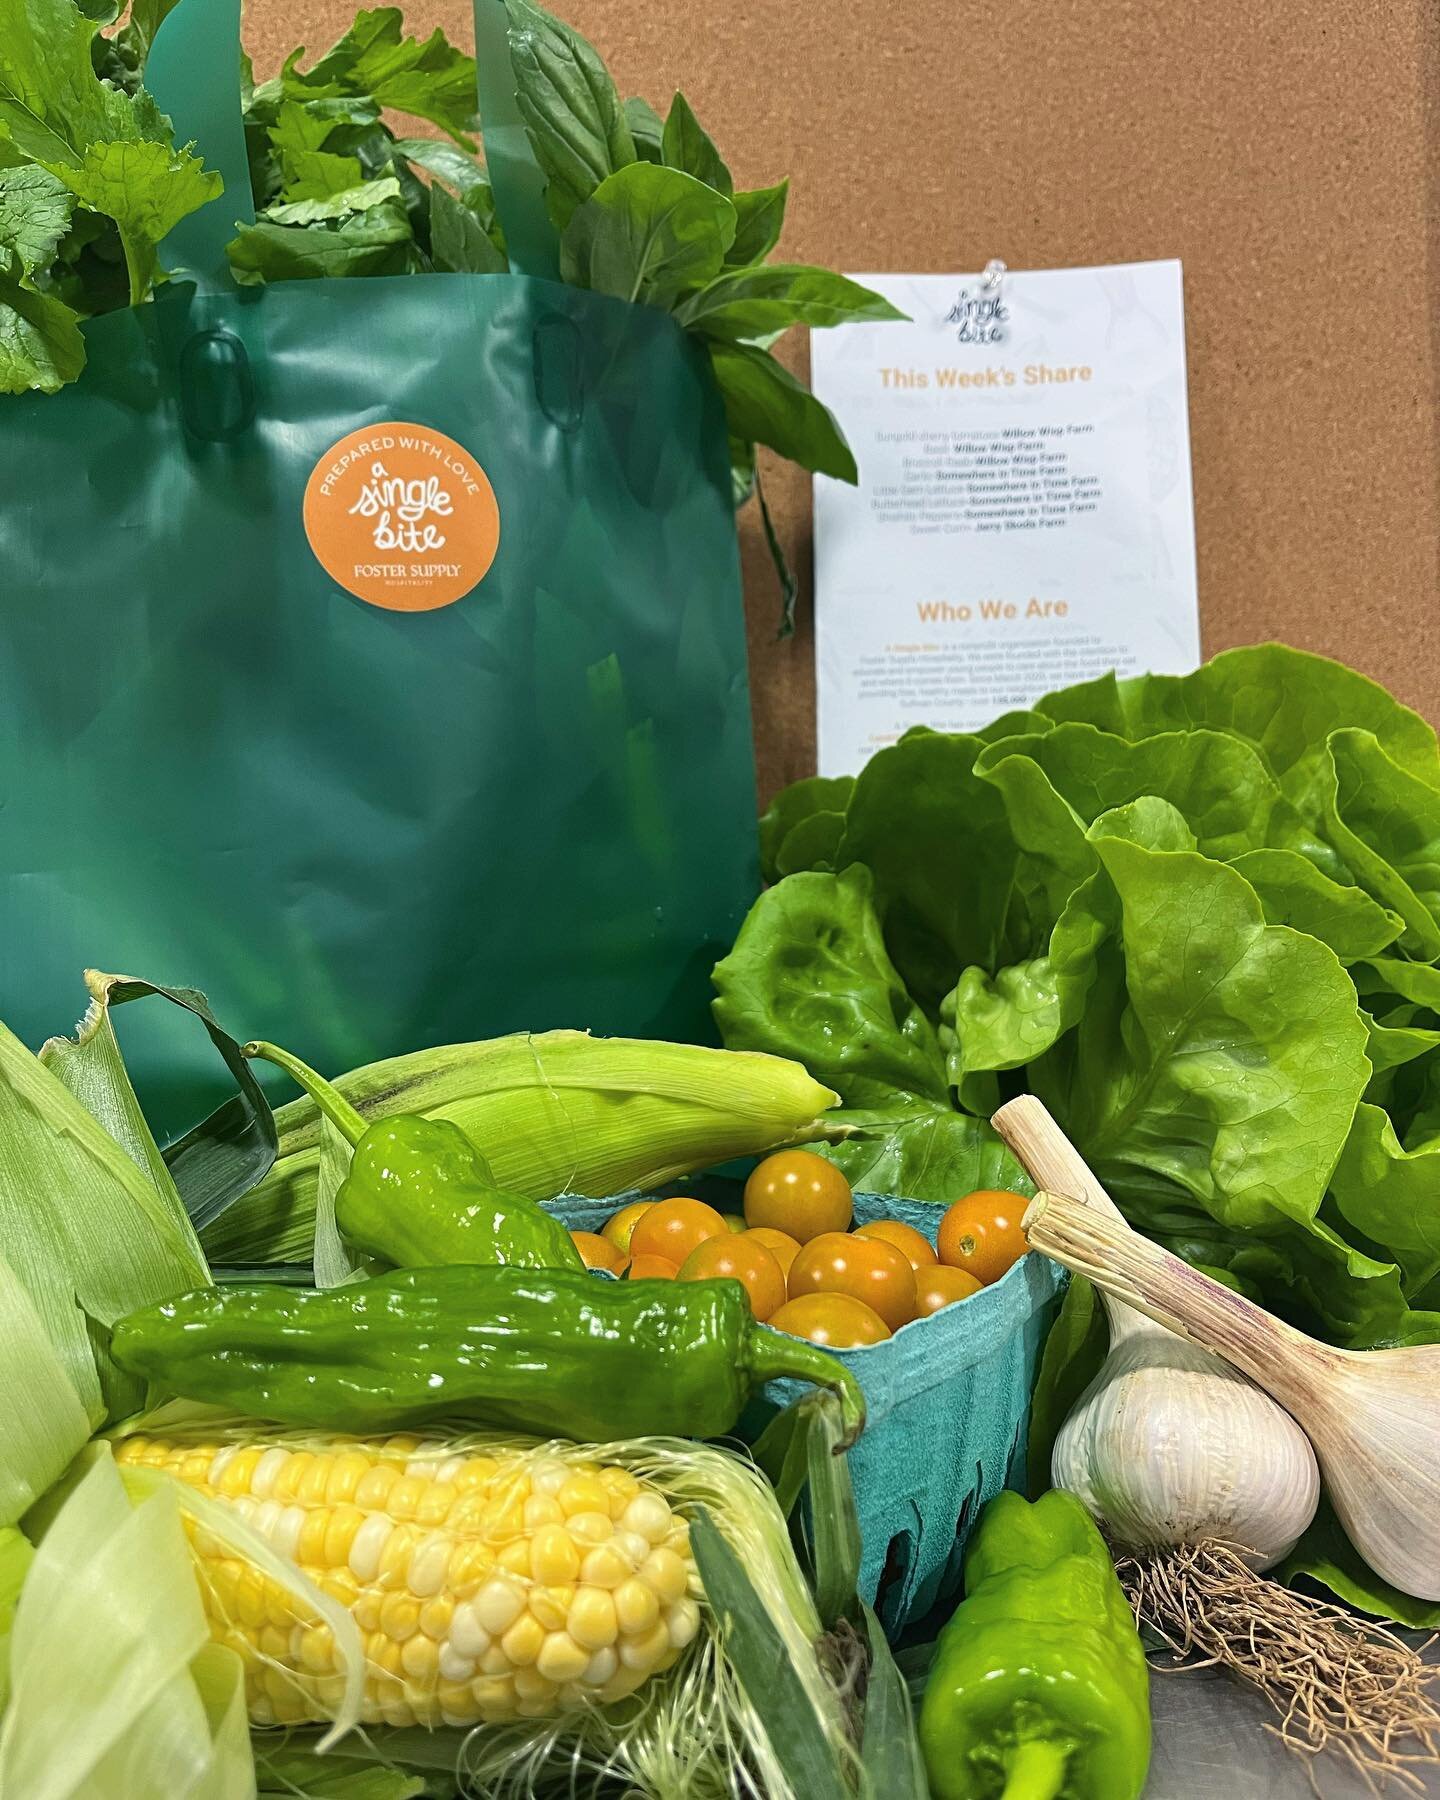 Real Food for Real Families! Today marks the first day of A Single Bite&rsquo;s Employer-Sponsored CSA. Local employers chose to prioritize the health of their staff and subsidized an 8-week long CSA program for their workers- conveniently delivered 